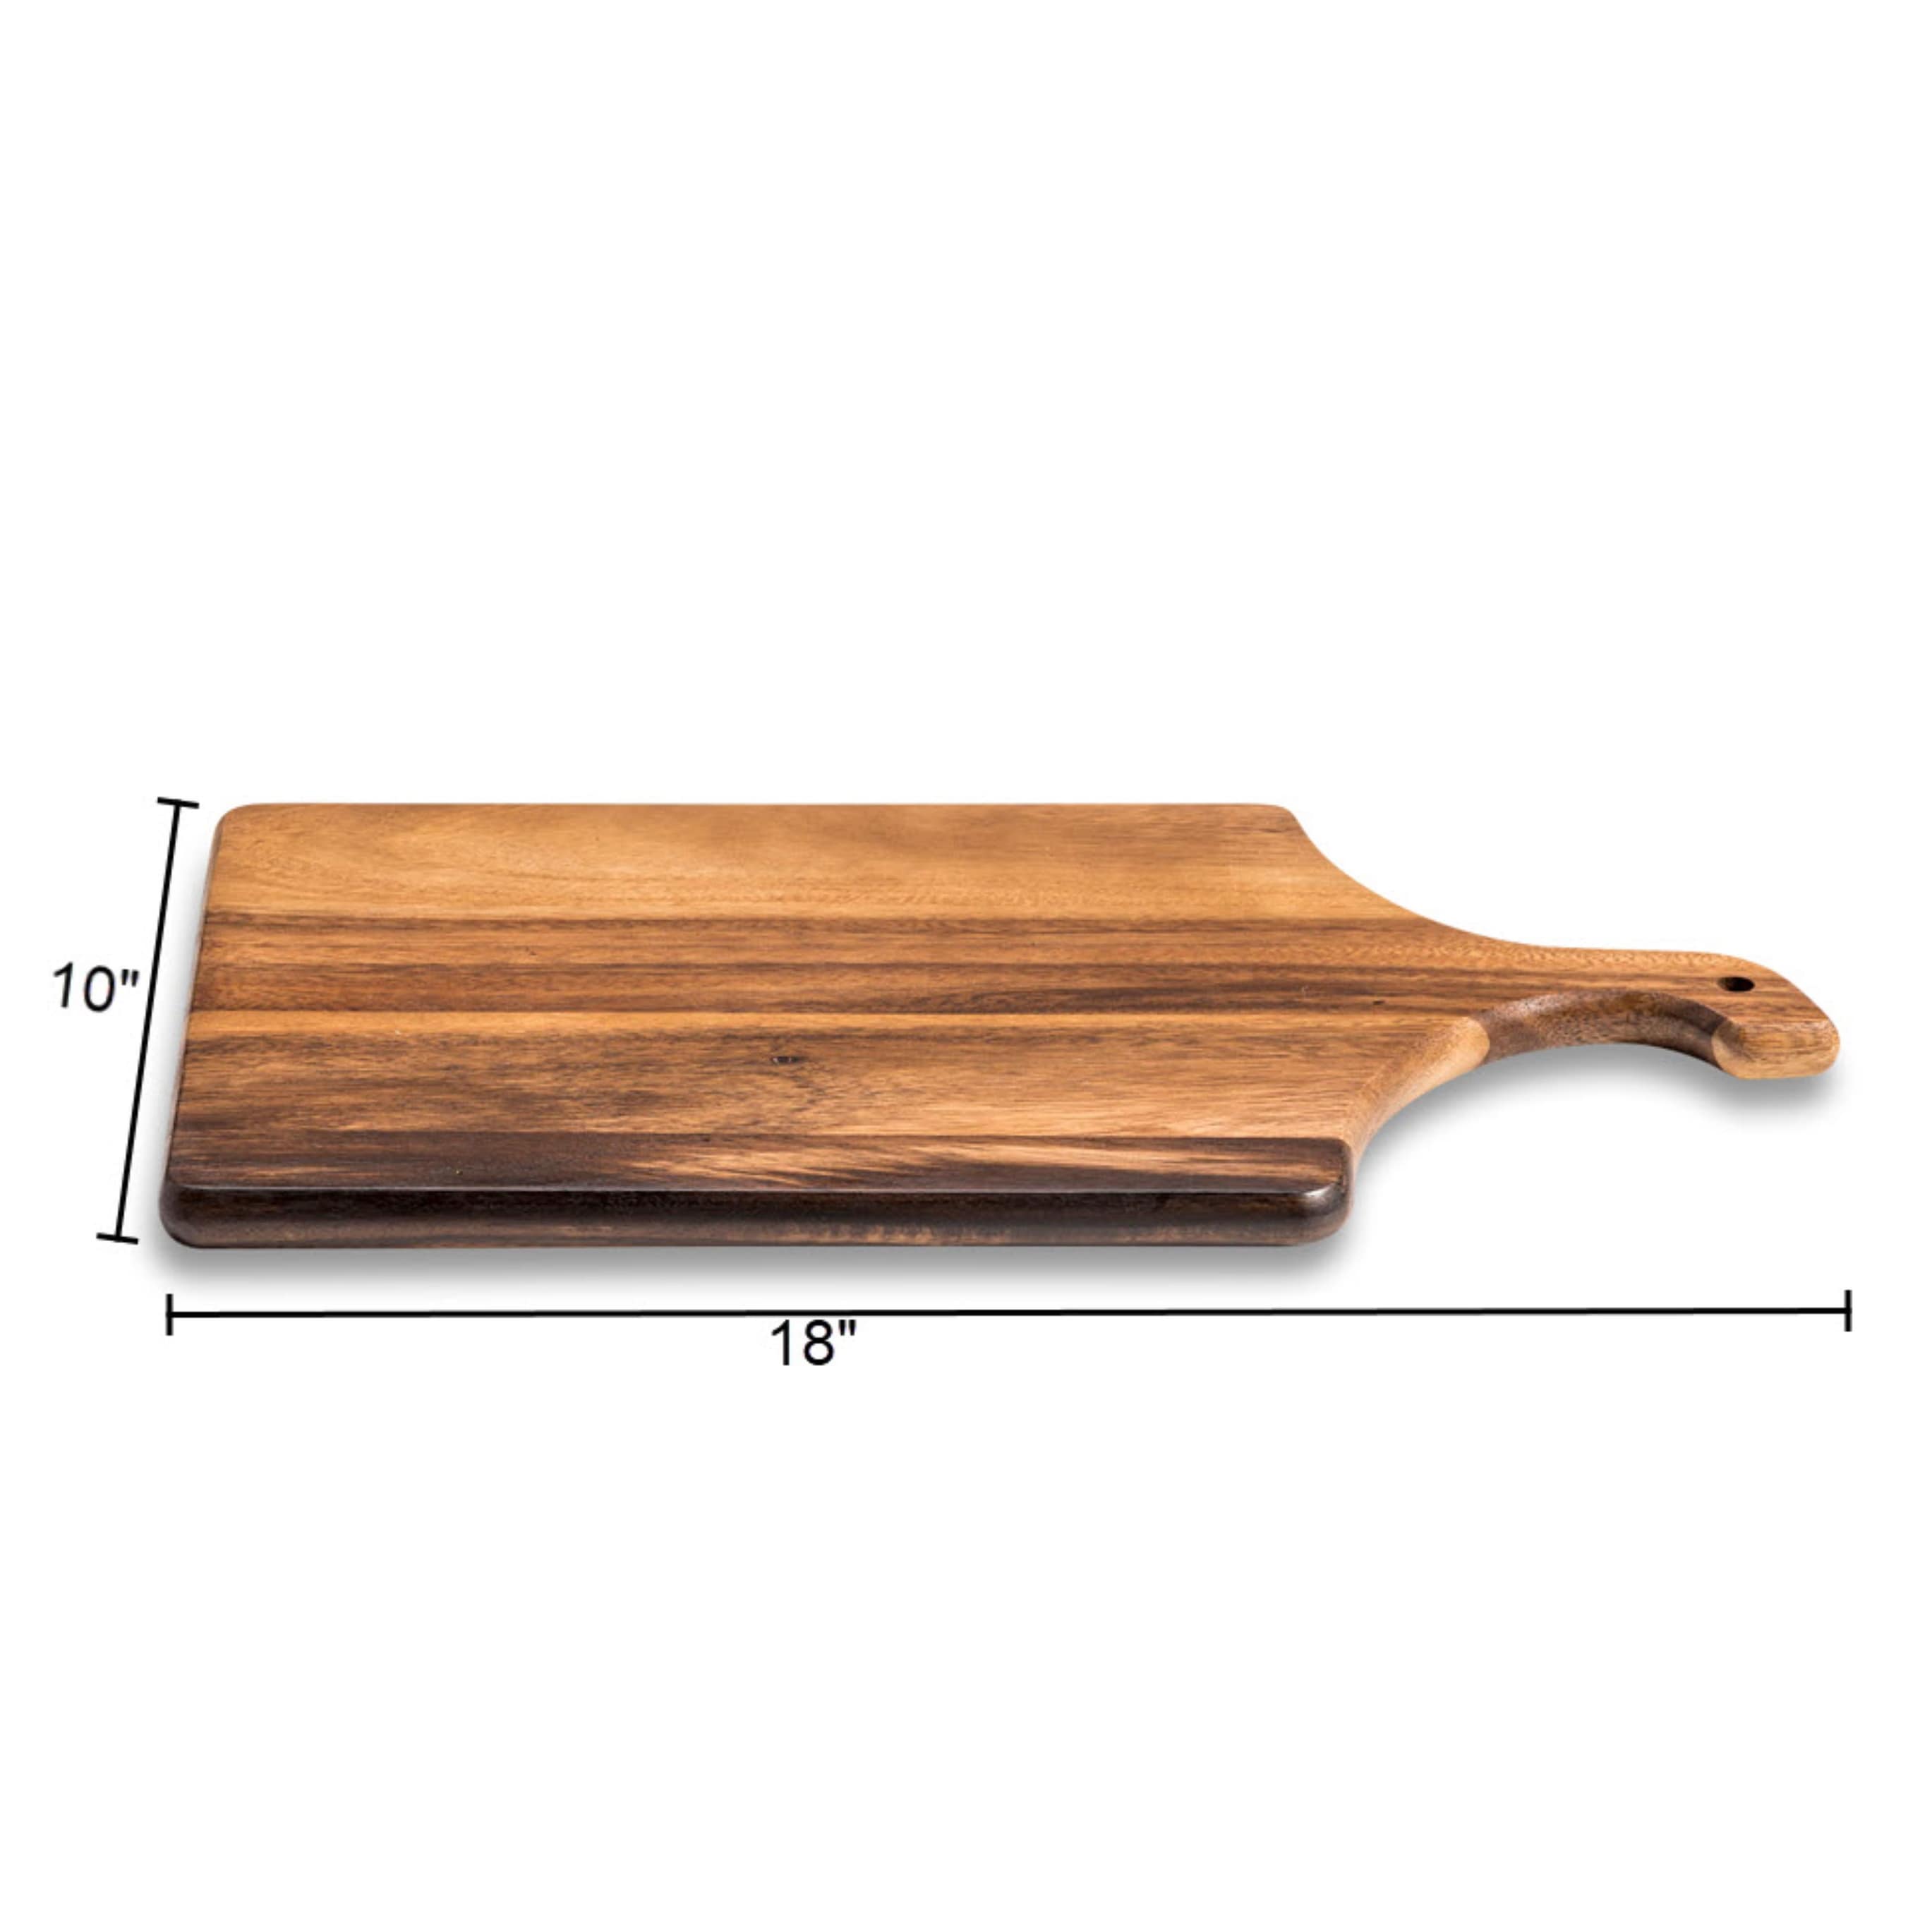 https://ak1.ostkcdn.com/images/products/is/images/direct/b156dcbc35167ca6e89a04db4155a5e22c1400eb/Acacia-Wood-Cutting--Charcuterie-Board---Extra-Large.jpg